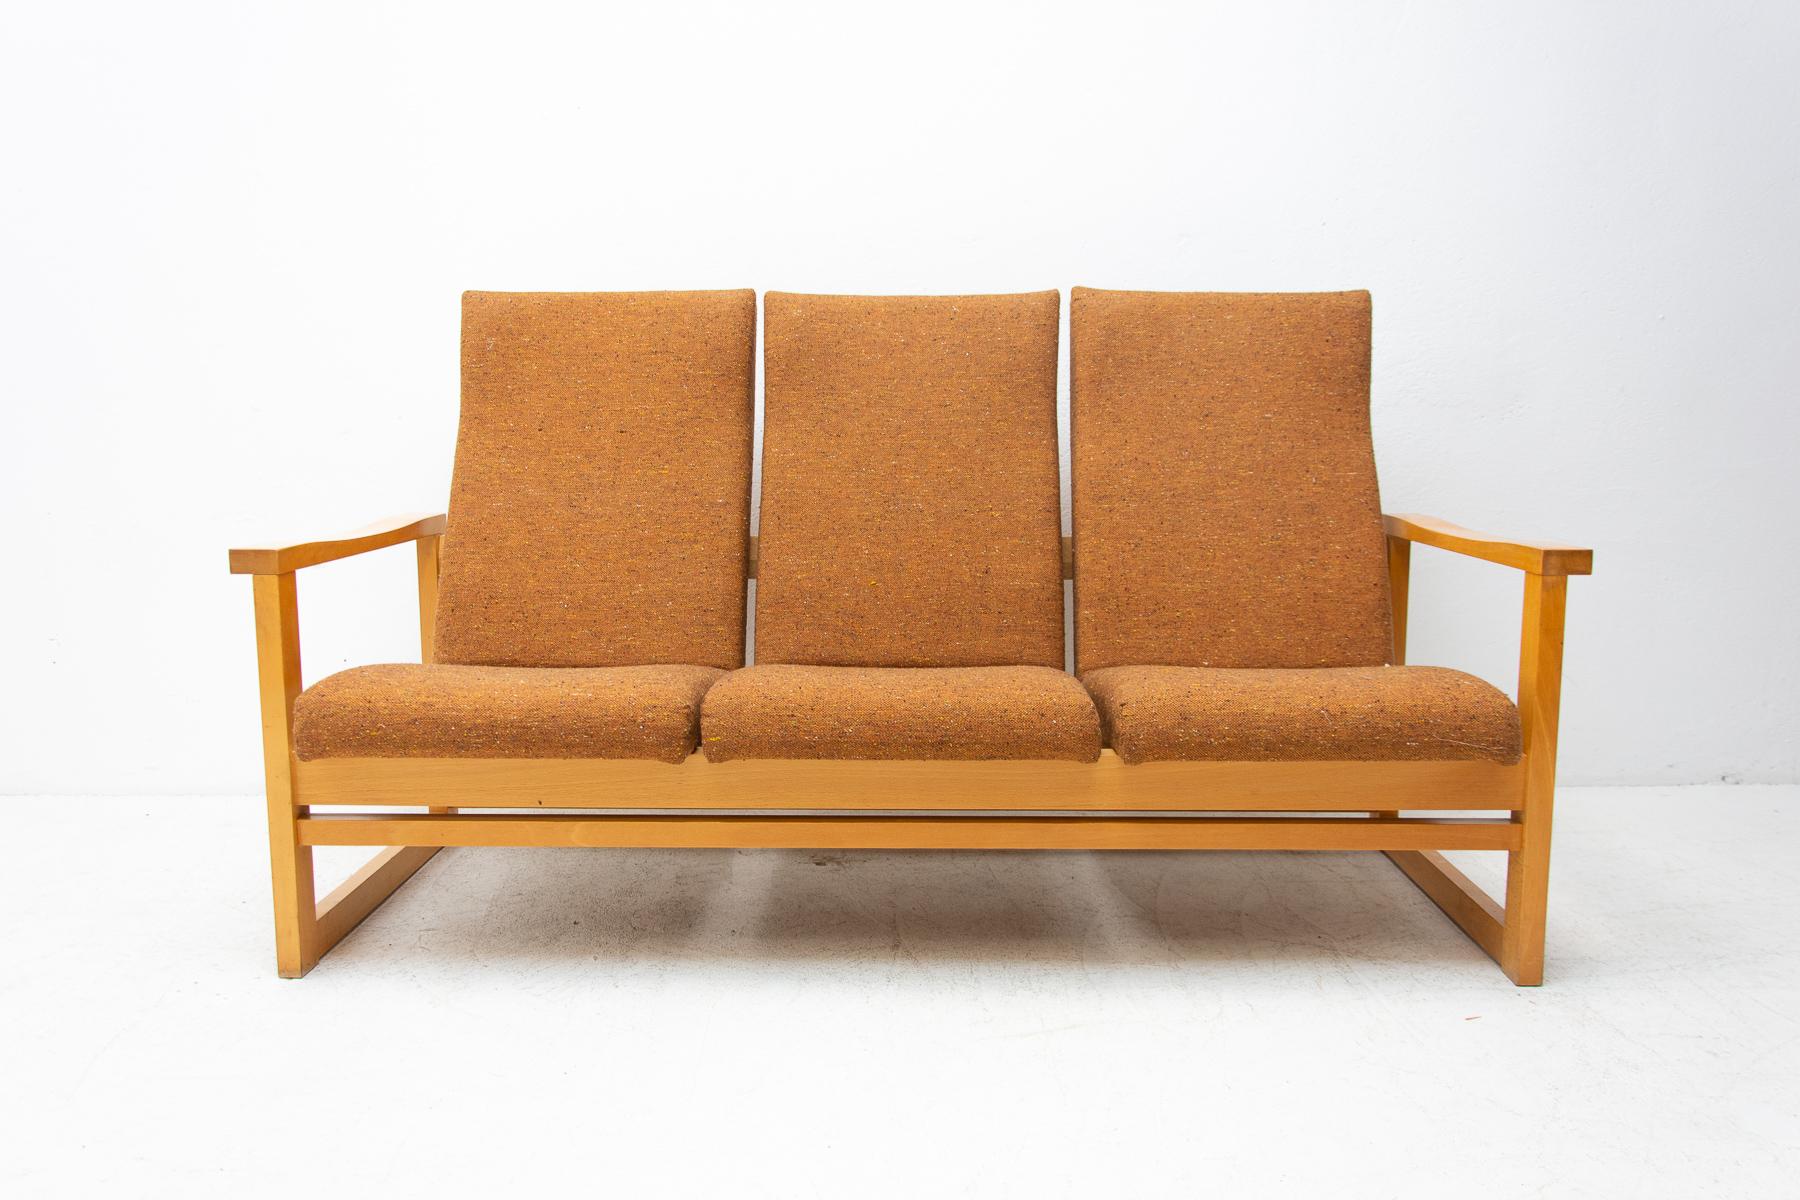 This Scandinavian style sofa was made in the 1970´s. It´s upholstered in fabric. The structure is made of beech wood. In great original condition.

Measure: Seat height: 39 cm.